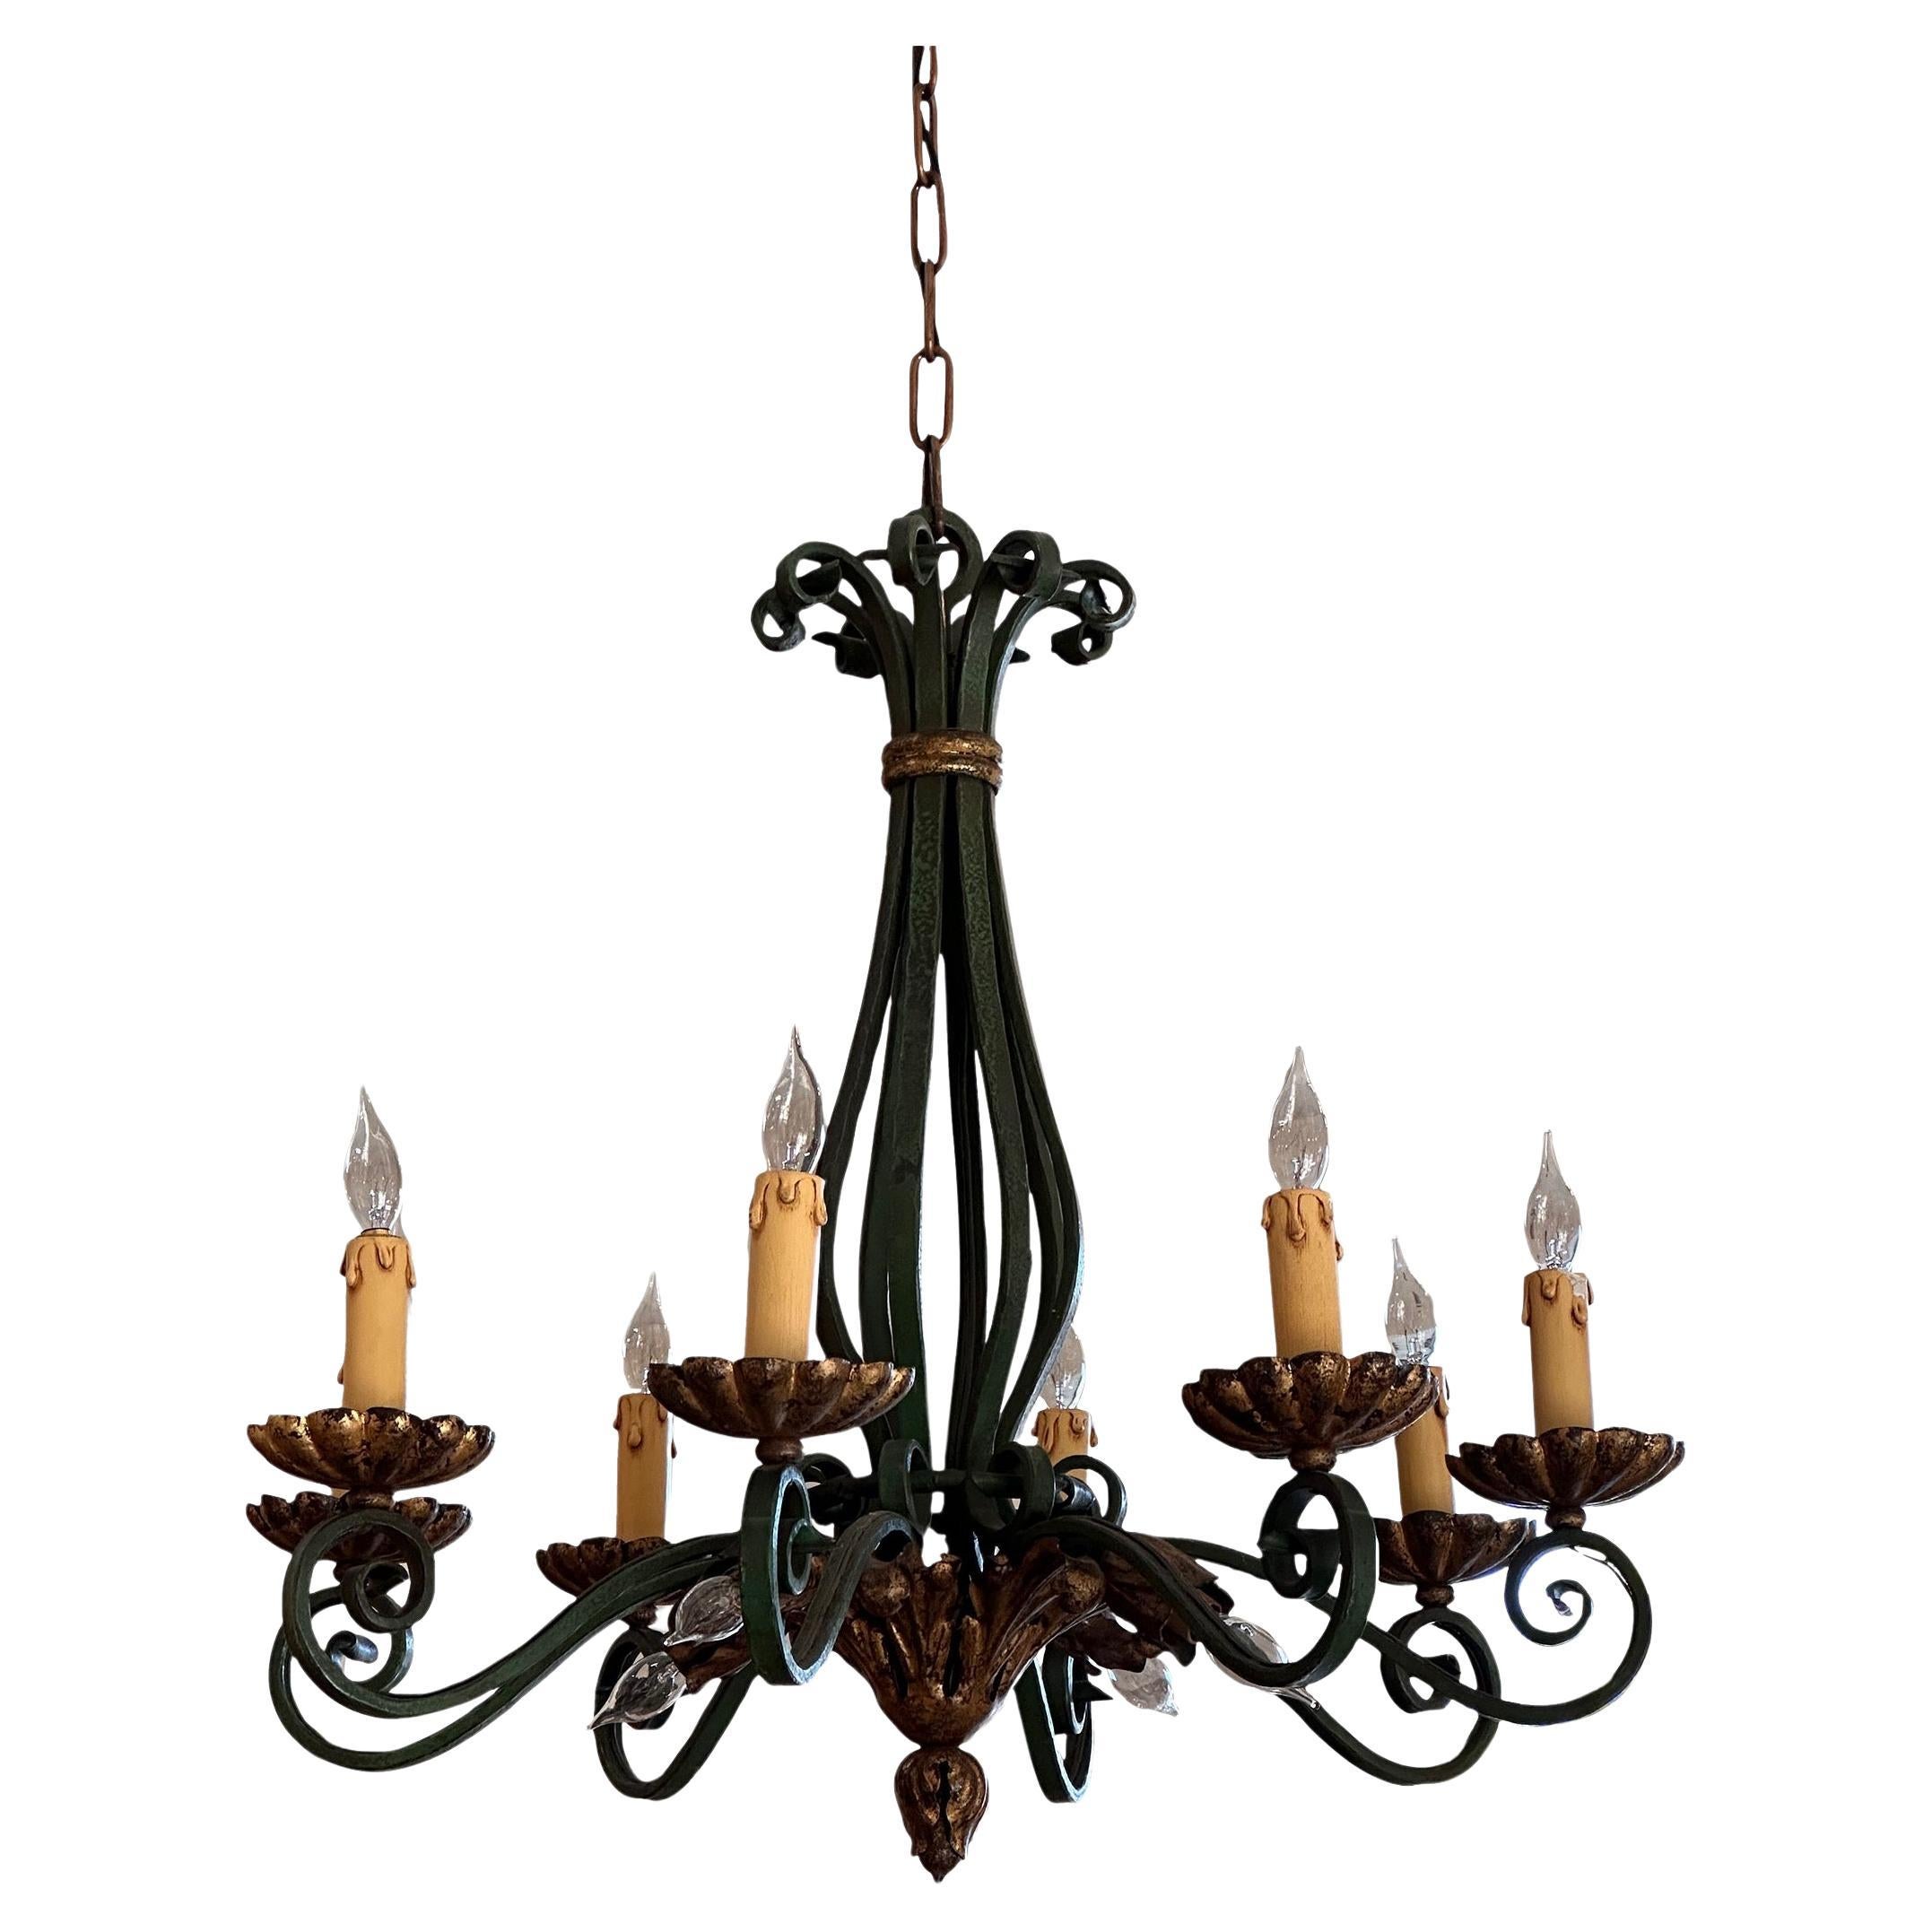 1920s Painted Iron Chandelier